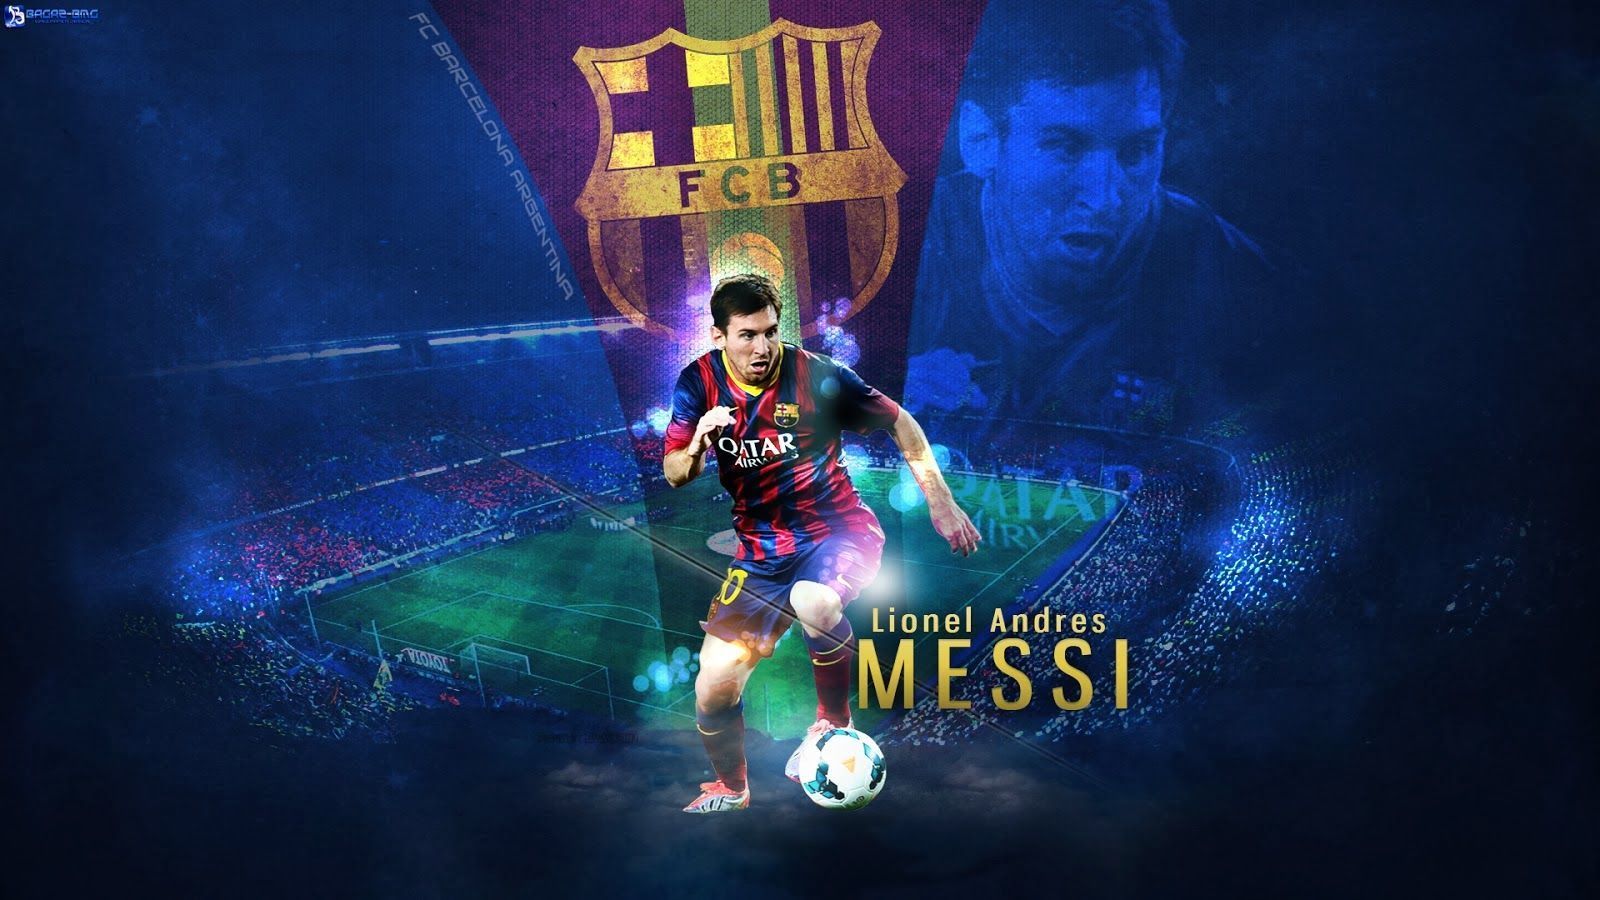 Hd Messi Wallpapers For Desktops Onlybackground